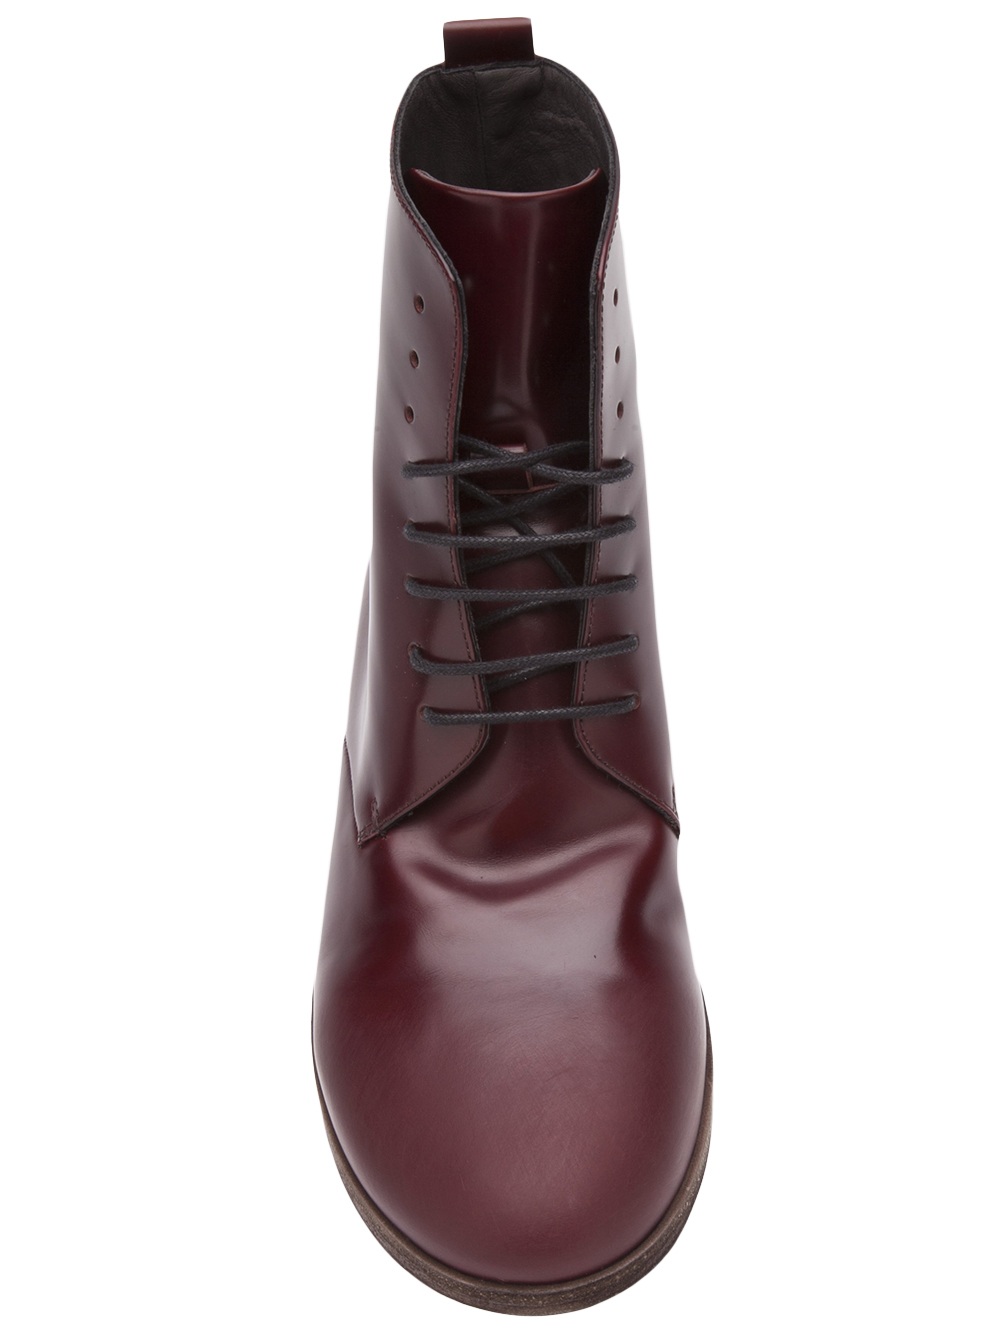 Marsèll Cordovan Boot in Red for Men - Lyst